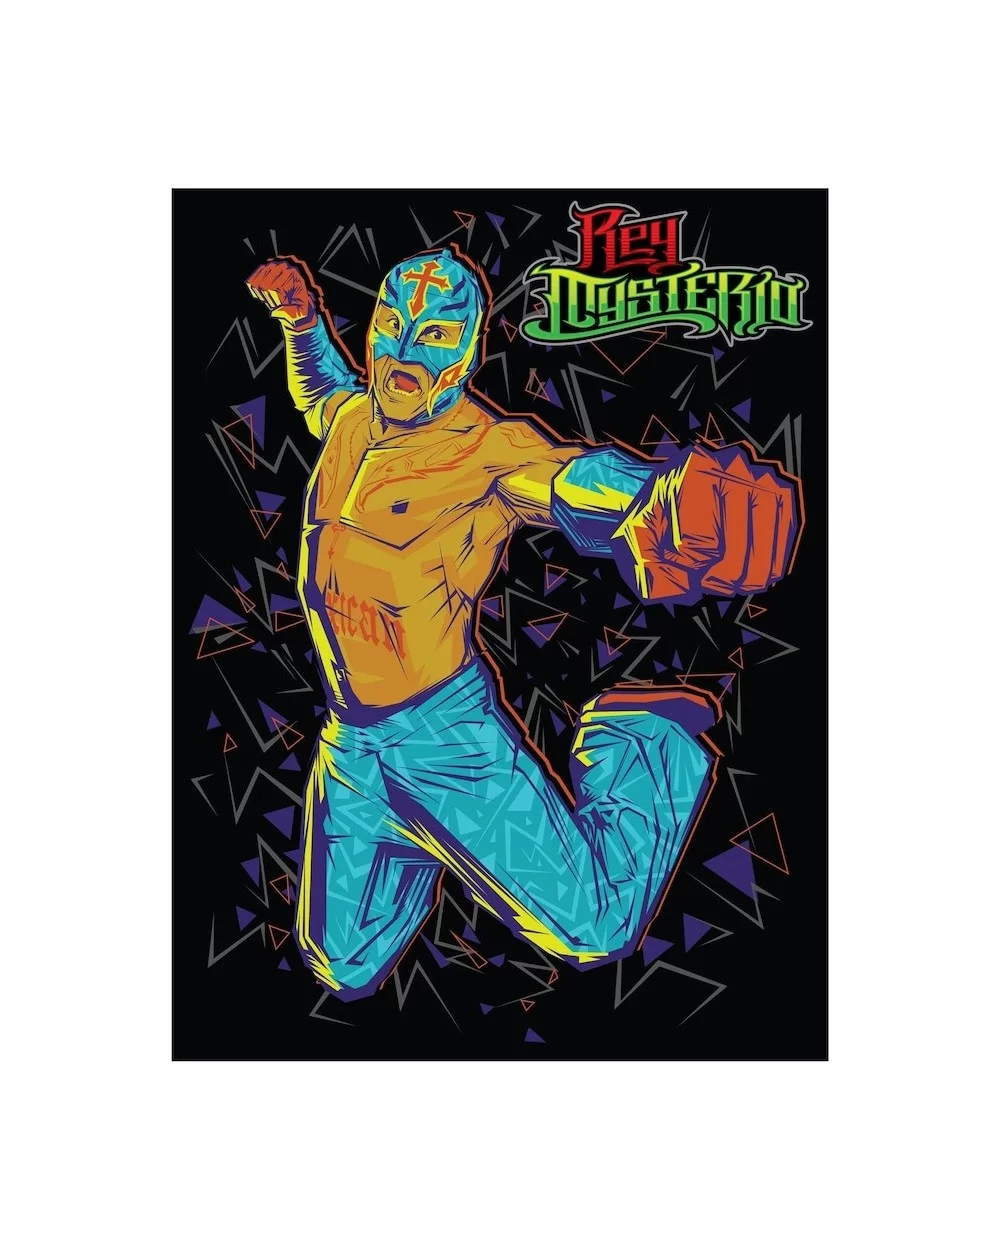 Fathead Rey Mysterio Punch Out Removable Superstar Mural Decal $16.32 Home & Office